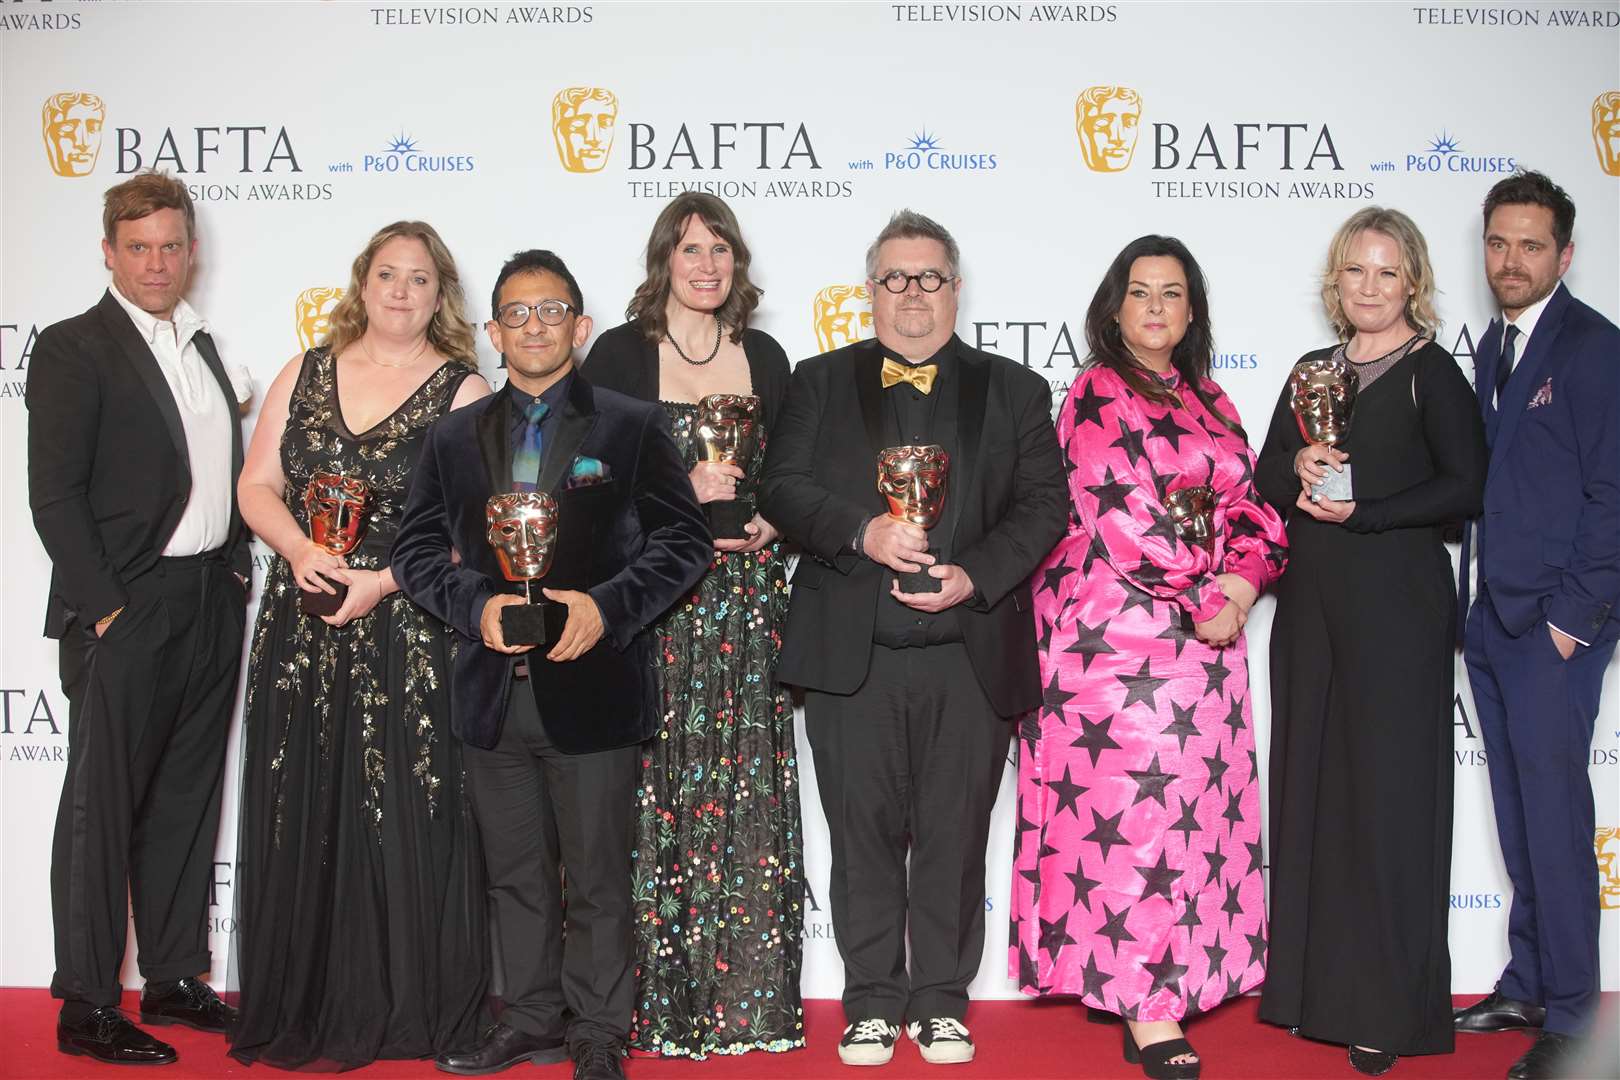 Casualty won the award for Best Soap & Continuing Drama at the Bafta Television Awards this year (Jeff Moore/PA)